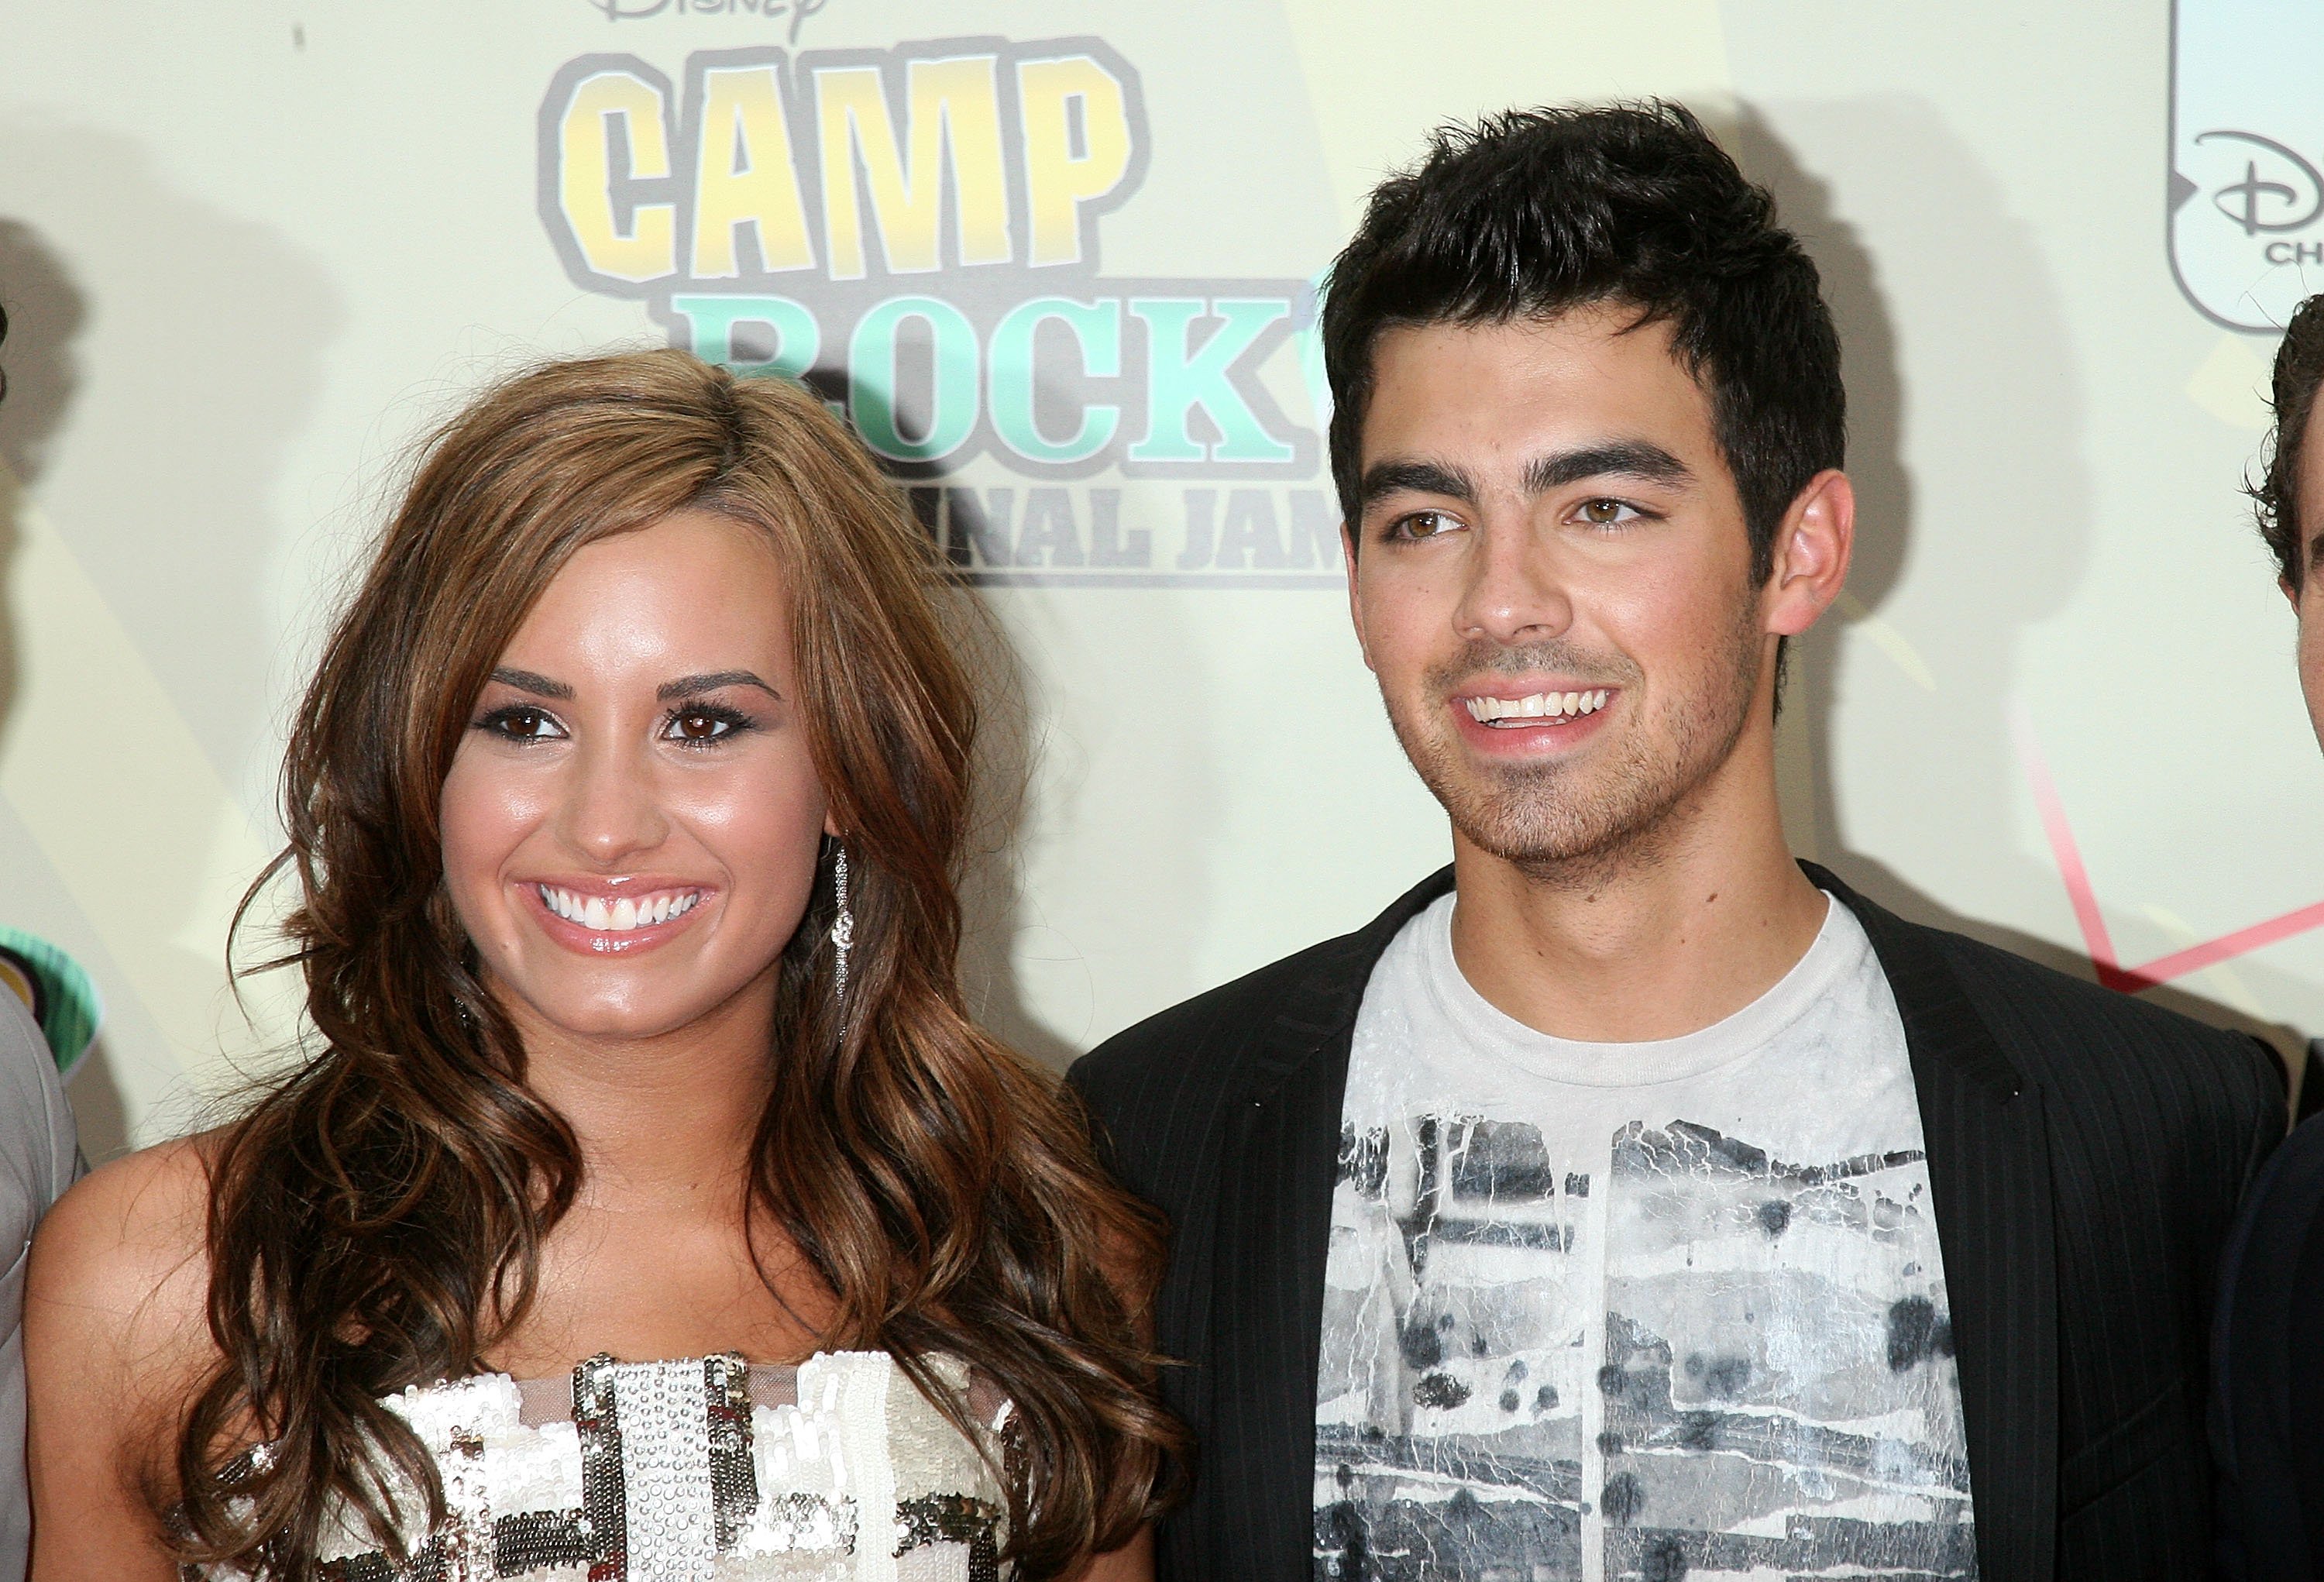 Demi Lovato and Joe Jonas attend the premiere of 'Camp Rock 2: The Final Jam' on August 18, 2010 in New York City.